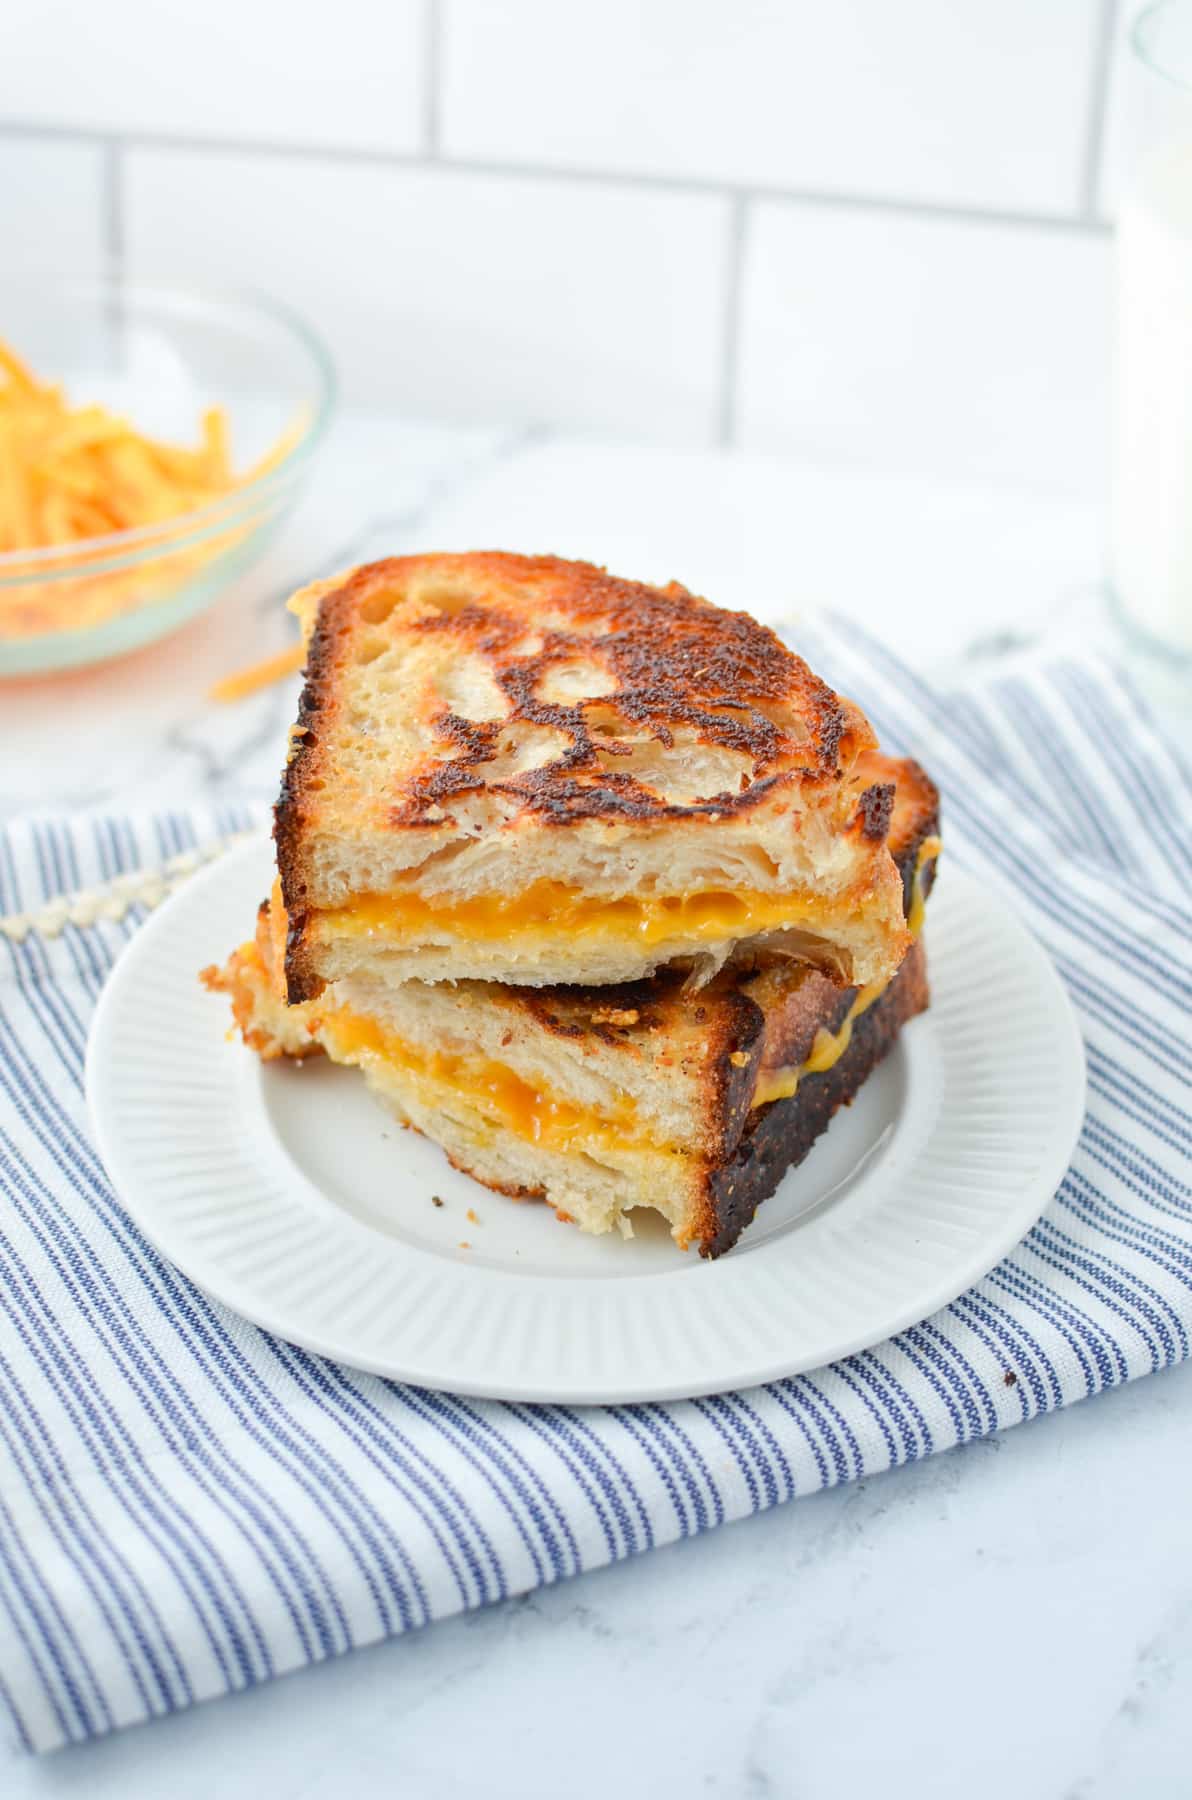 Two halves of a grilled cheese sandwich on a plate.